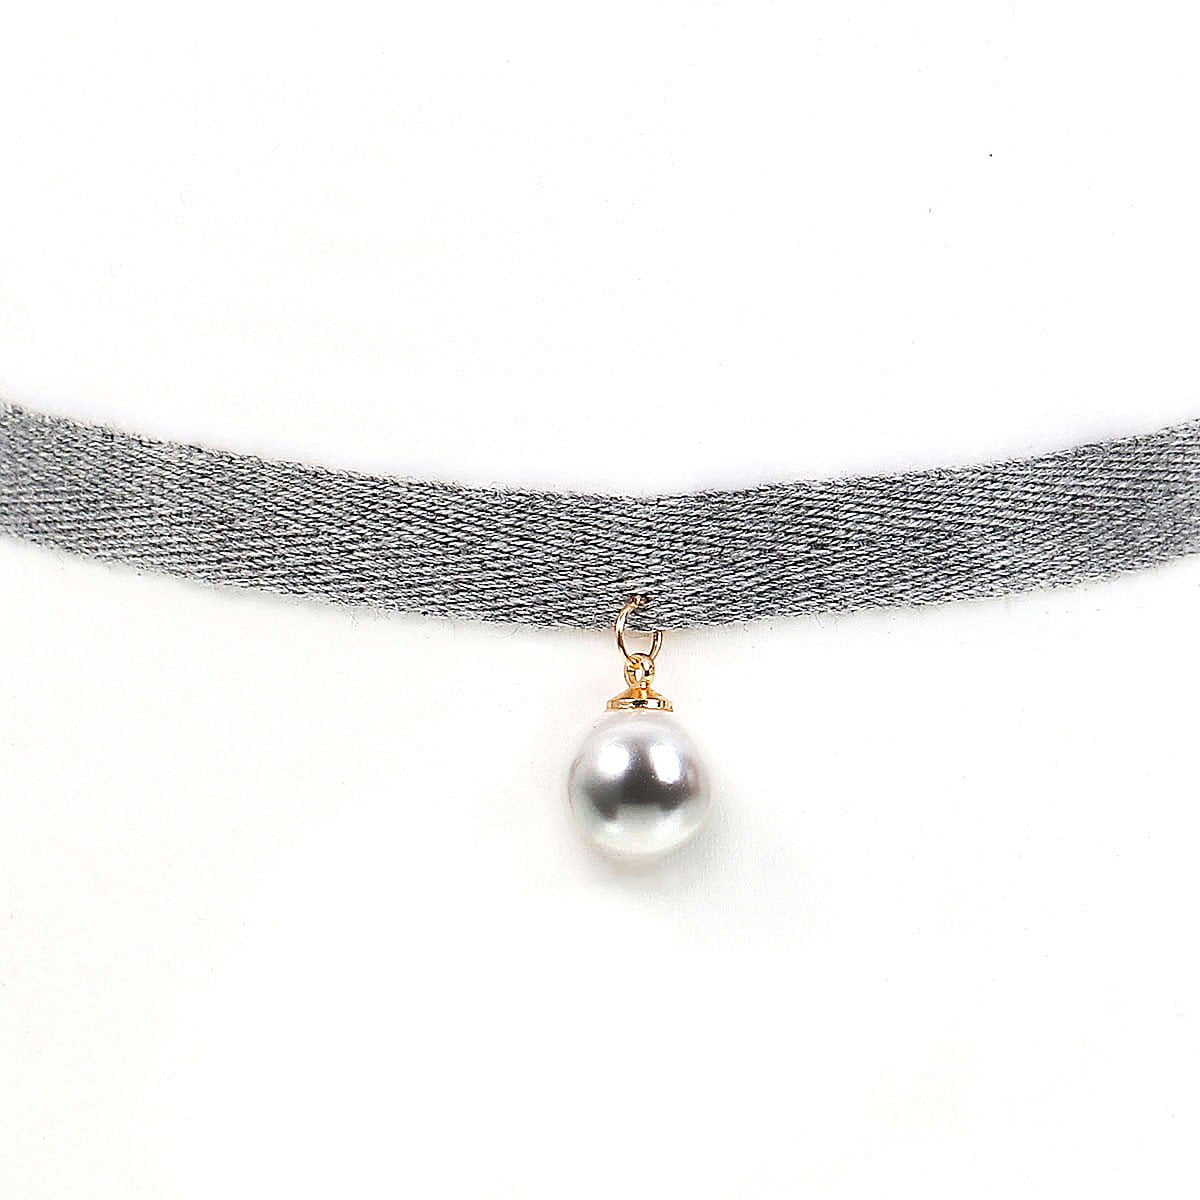 Sexy Sparkles Women Girls Choker Necklace Choose Black Velvet Chokers,  Multi color Triangle Pattern and more